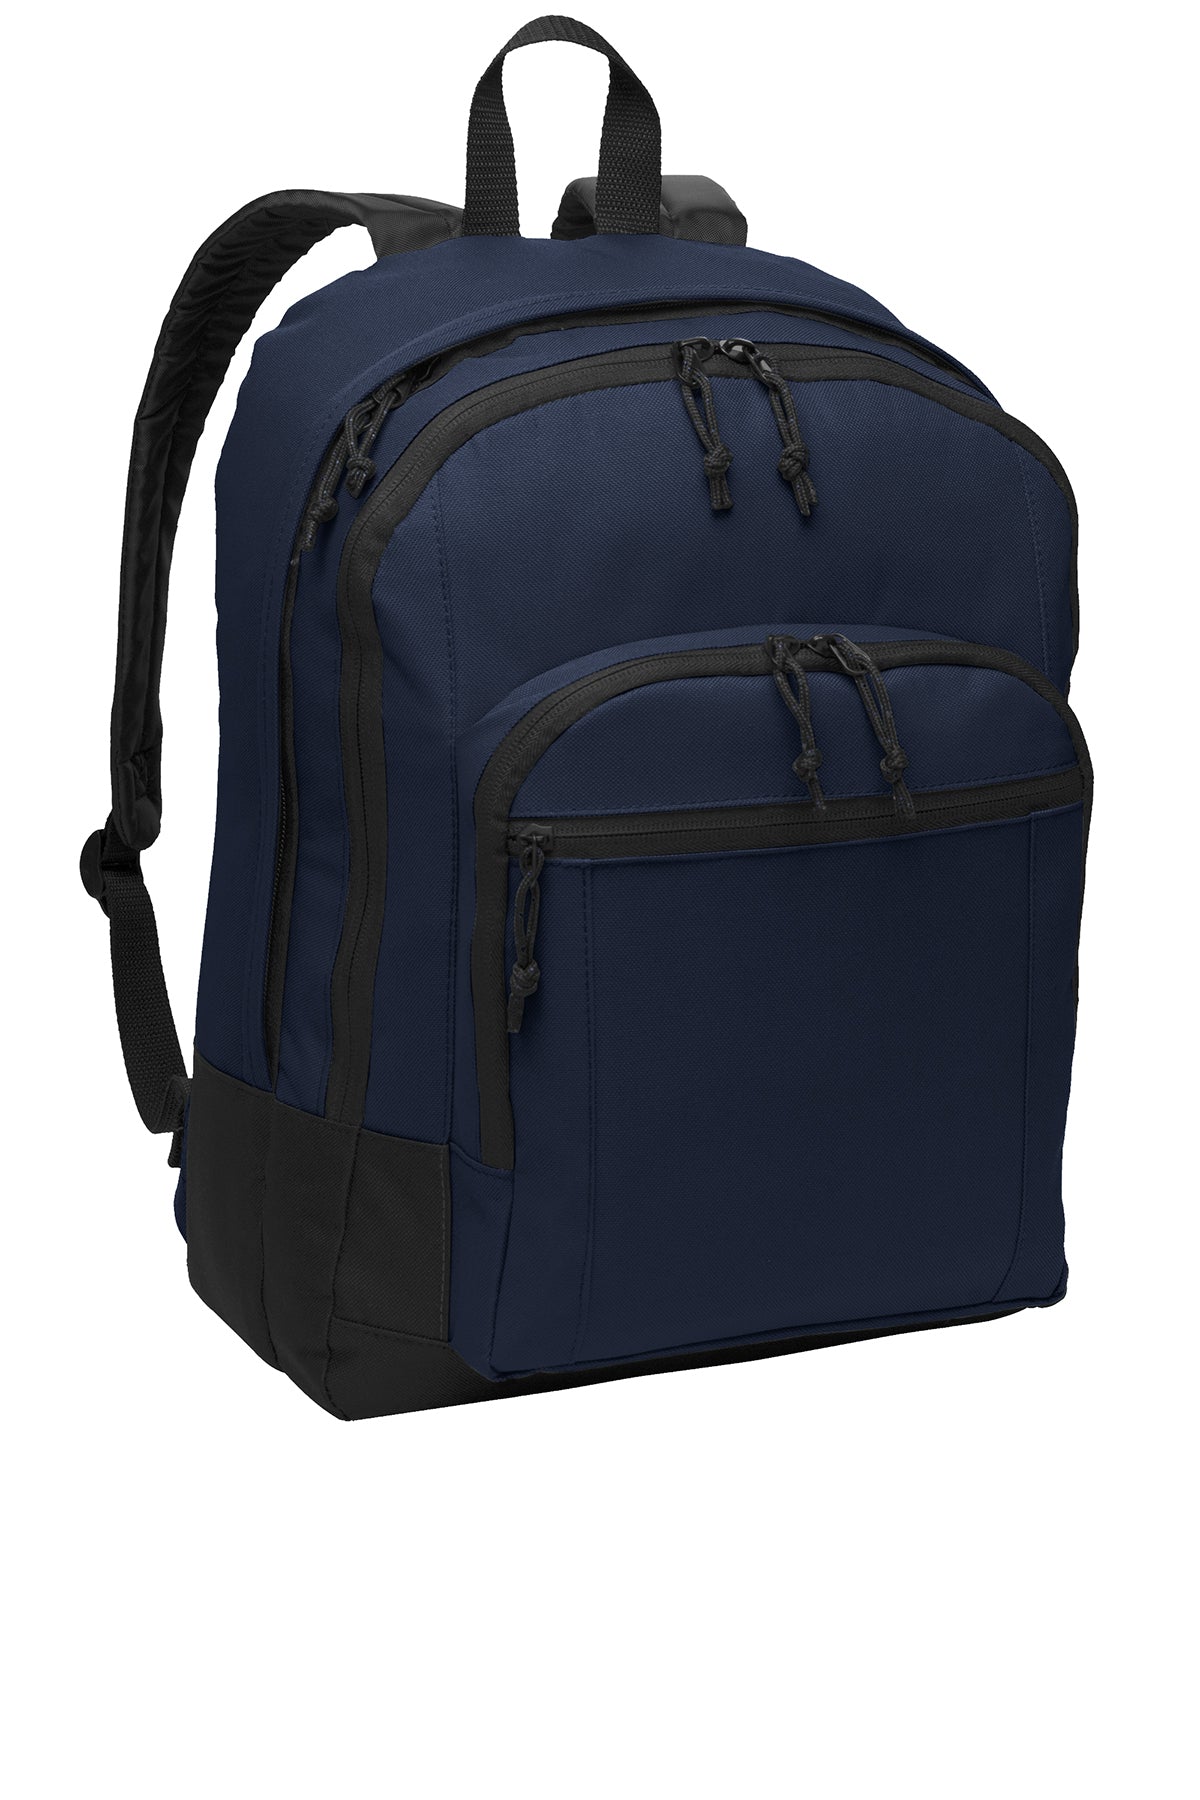 Basic Backpack-school logo added to the front pocket